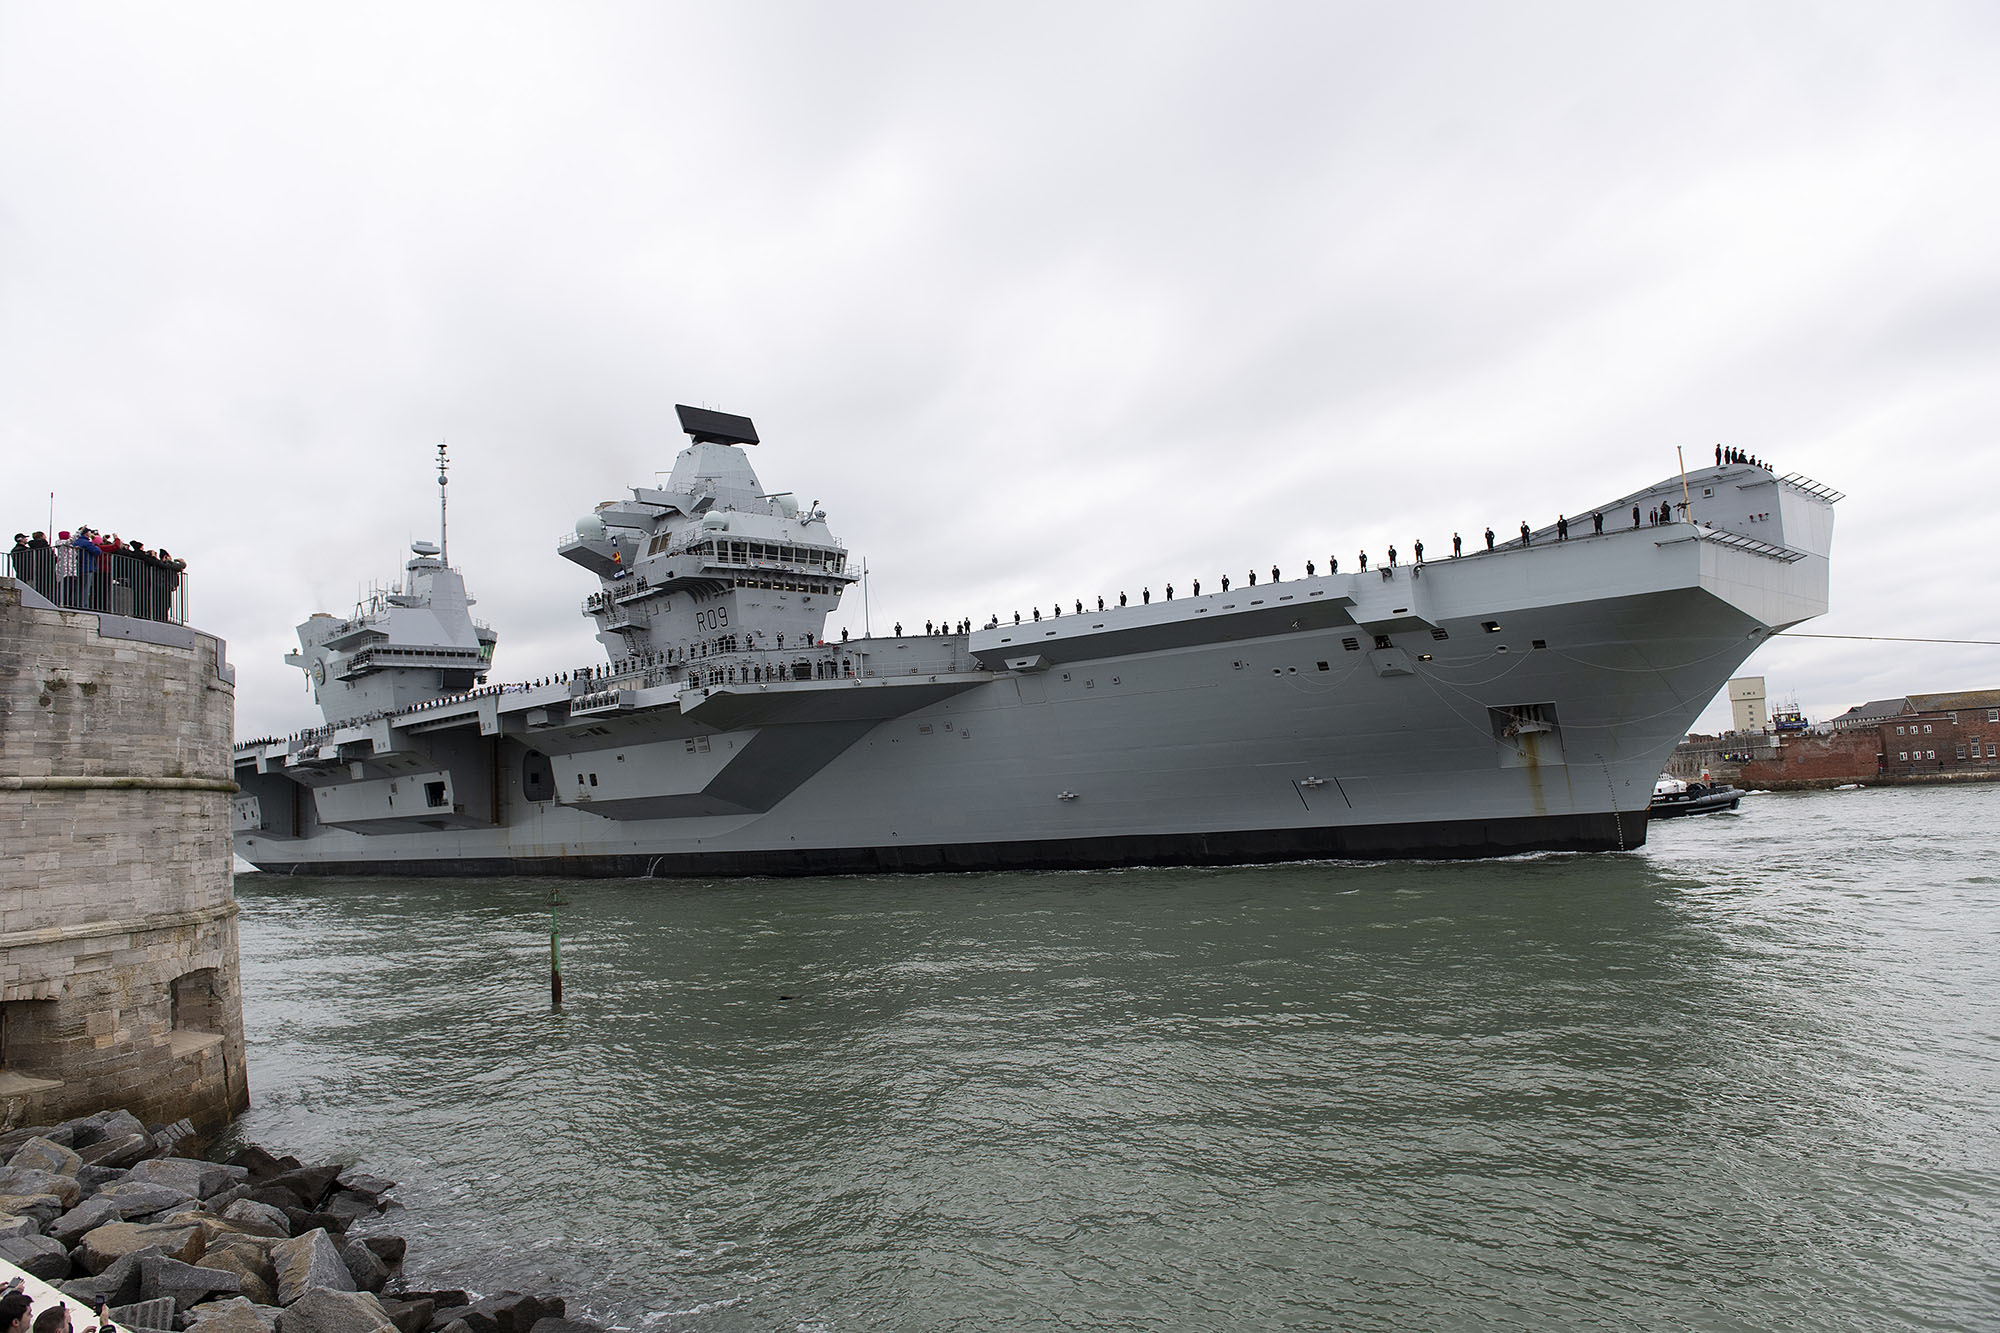 Large Royal Navy ship sailing into Portsmouth harbour